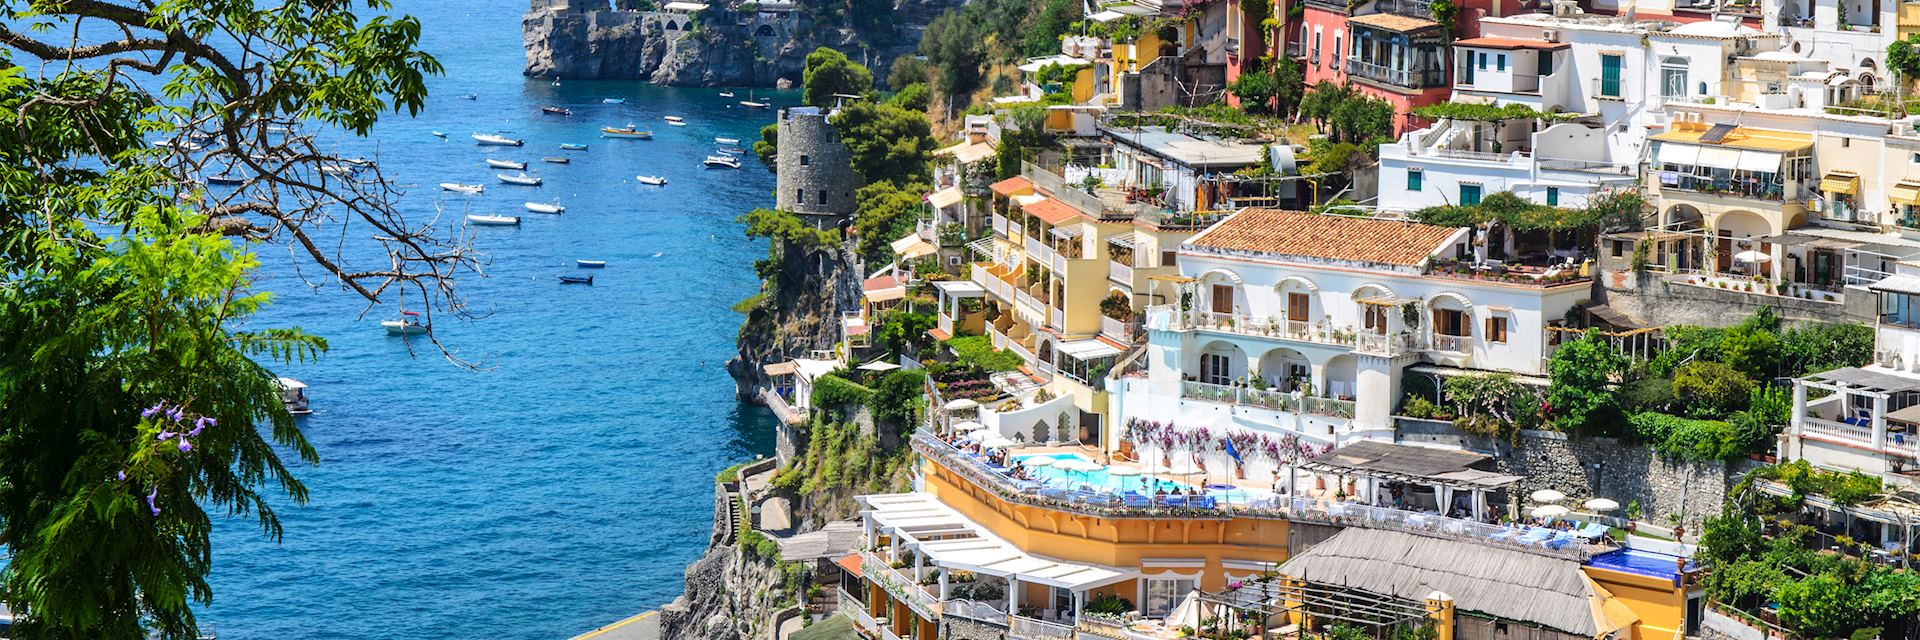 Best time to Visit The Amalfi Coast Climate Guide Audley Travel US